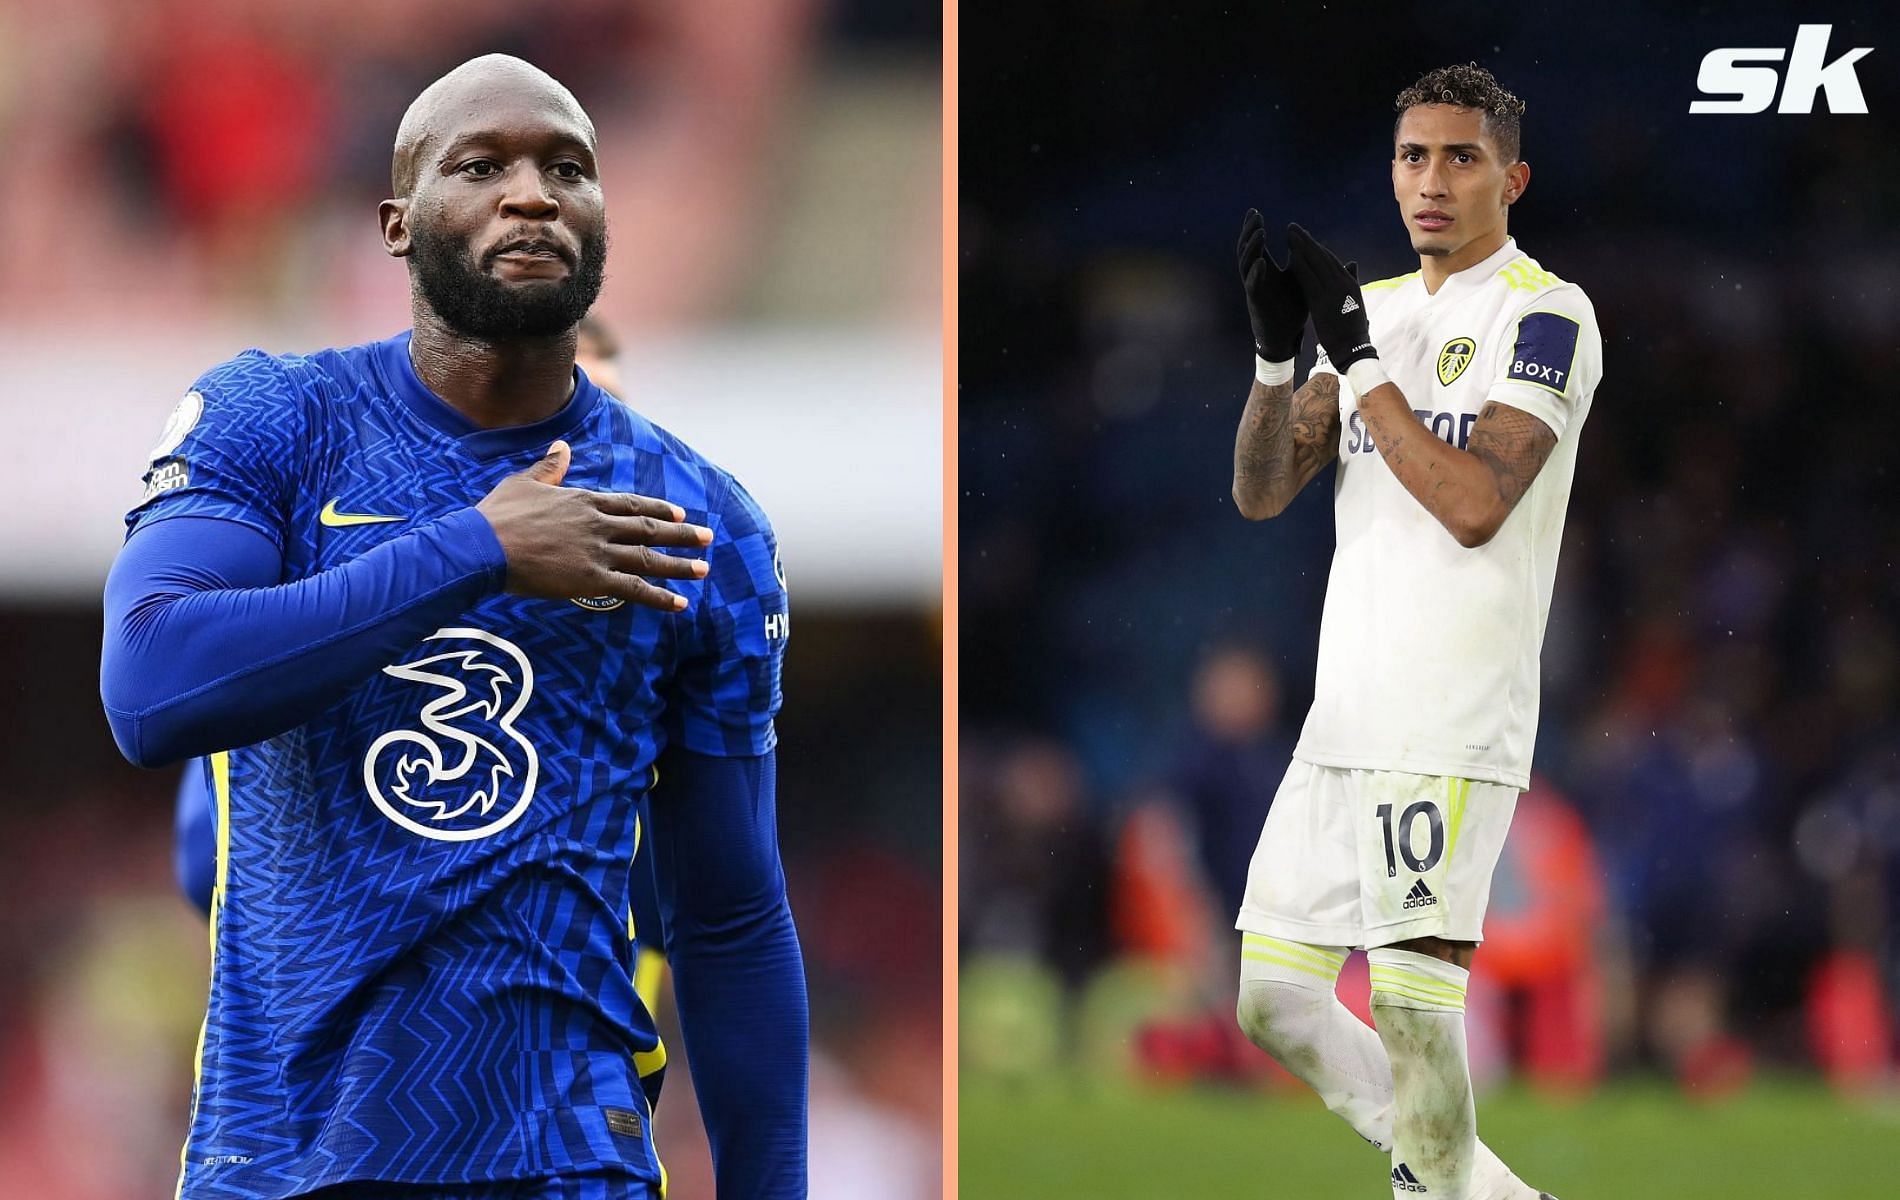 Both Chelsea and Leeds United have stars who can decide the outcome of the match